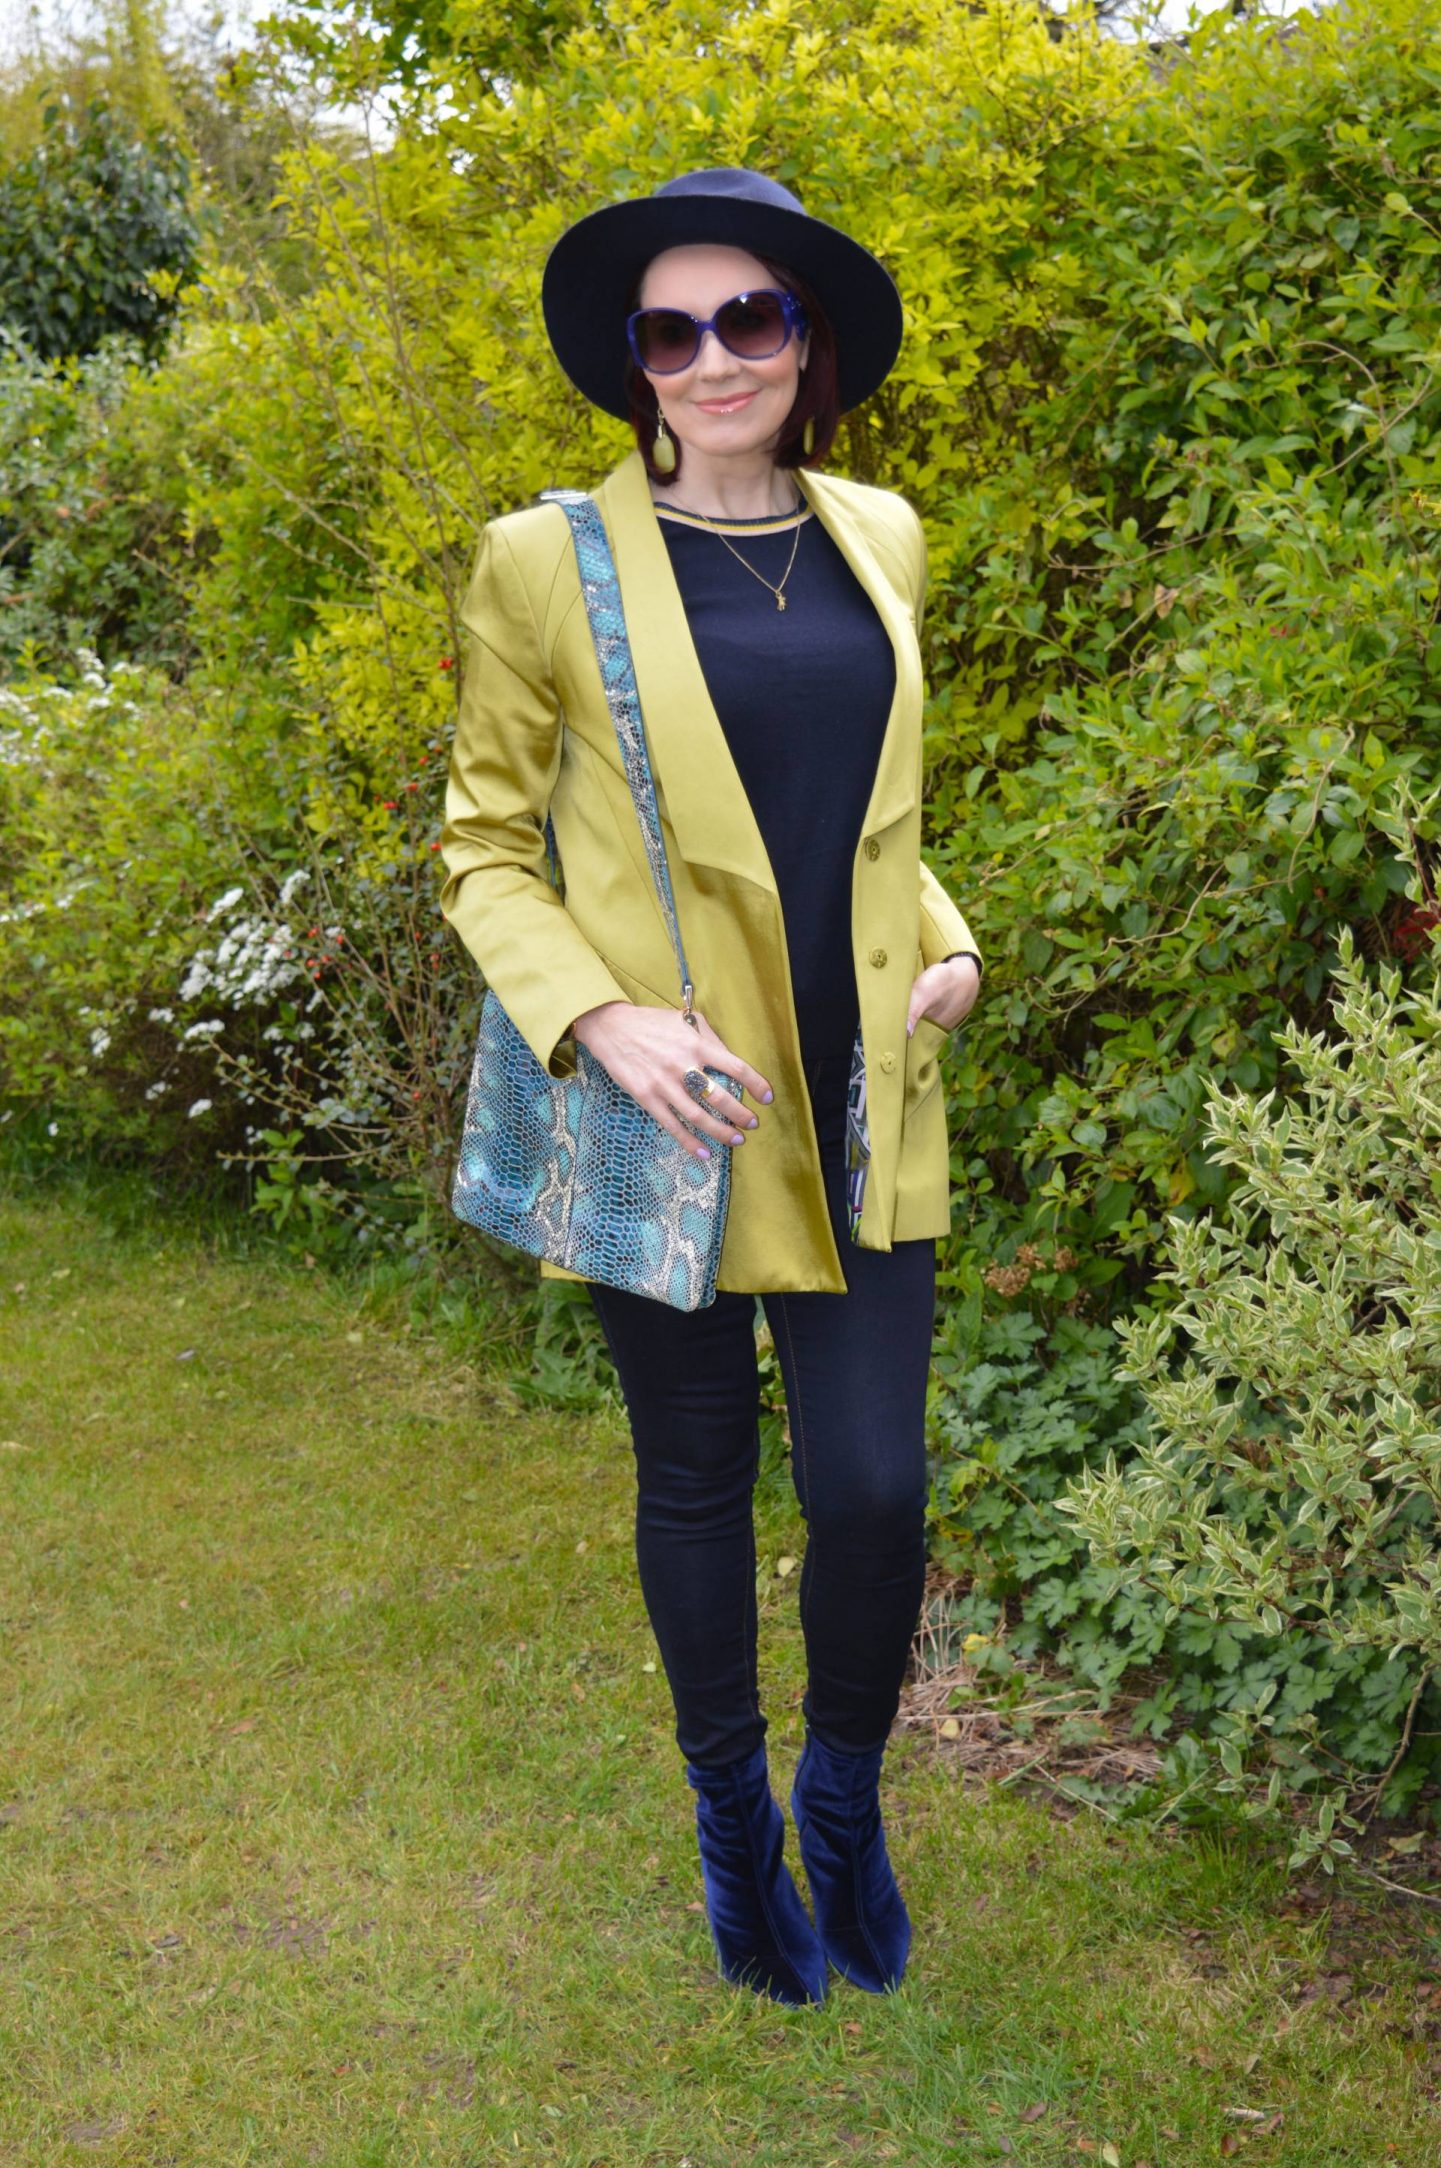 Spring Green and Navy, Matthew Williamson green jacket, Scotch and Soda navy jumper